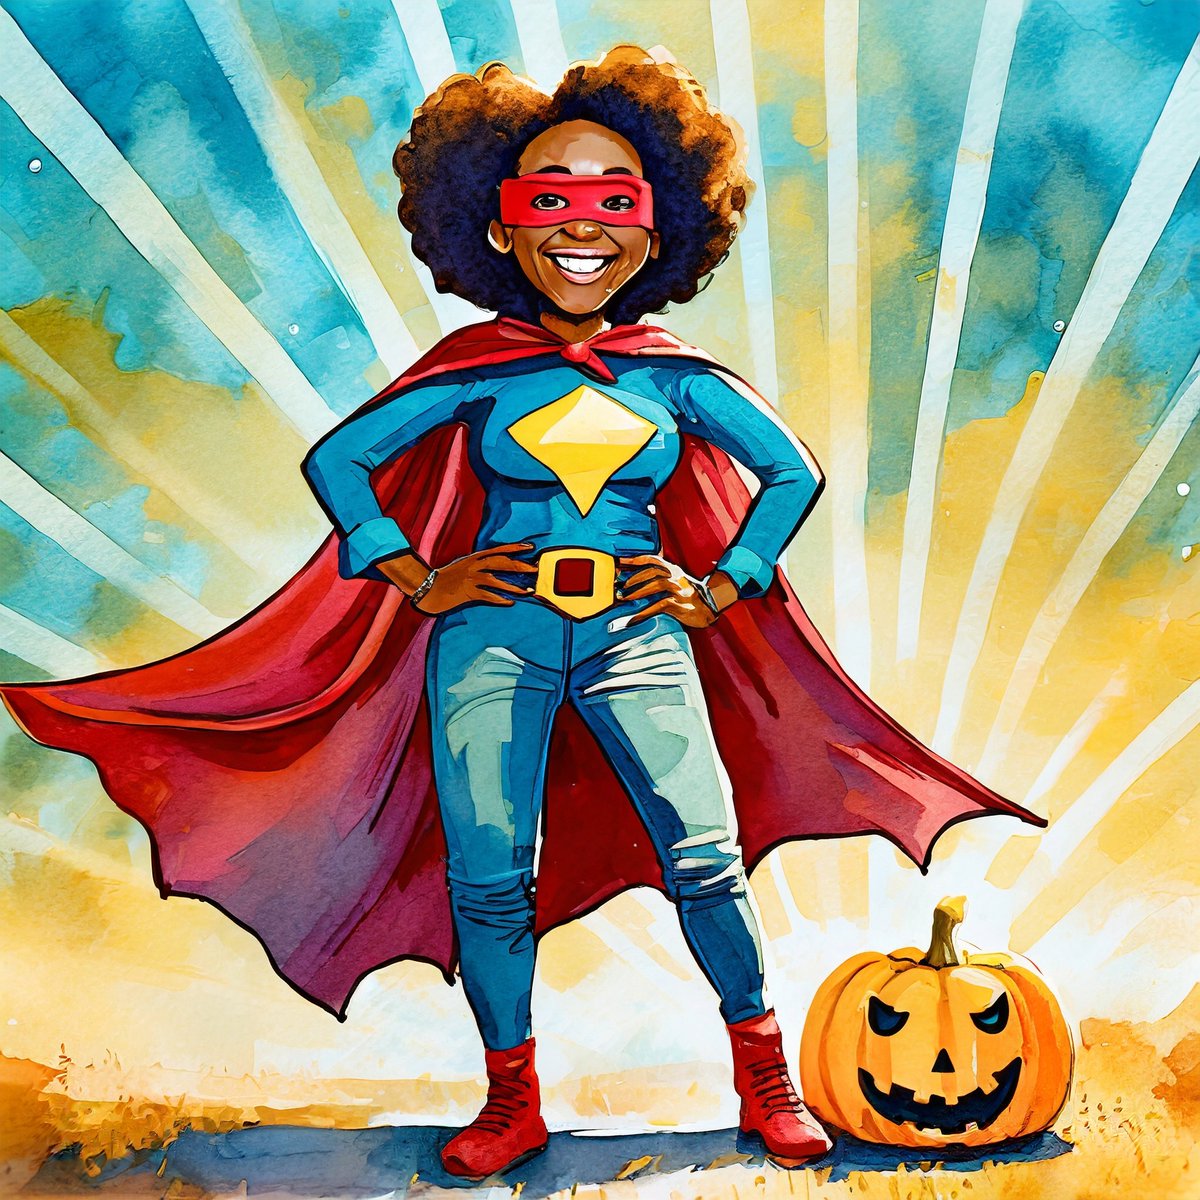 This Halloween, we're celebrating the real superheroes - women who prioritize their health and well-being every day! 🎃 Join forces with us to shine a light on #EndometrialCancer and #BlackWomensHealth advocacy! ✨🫶🏻🫶🏽🫶🏾🫶🏿 🎃 Learn more : ECANAwomen.org